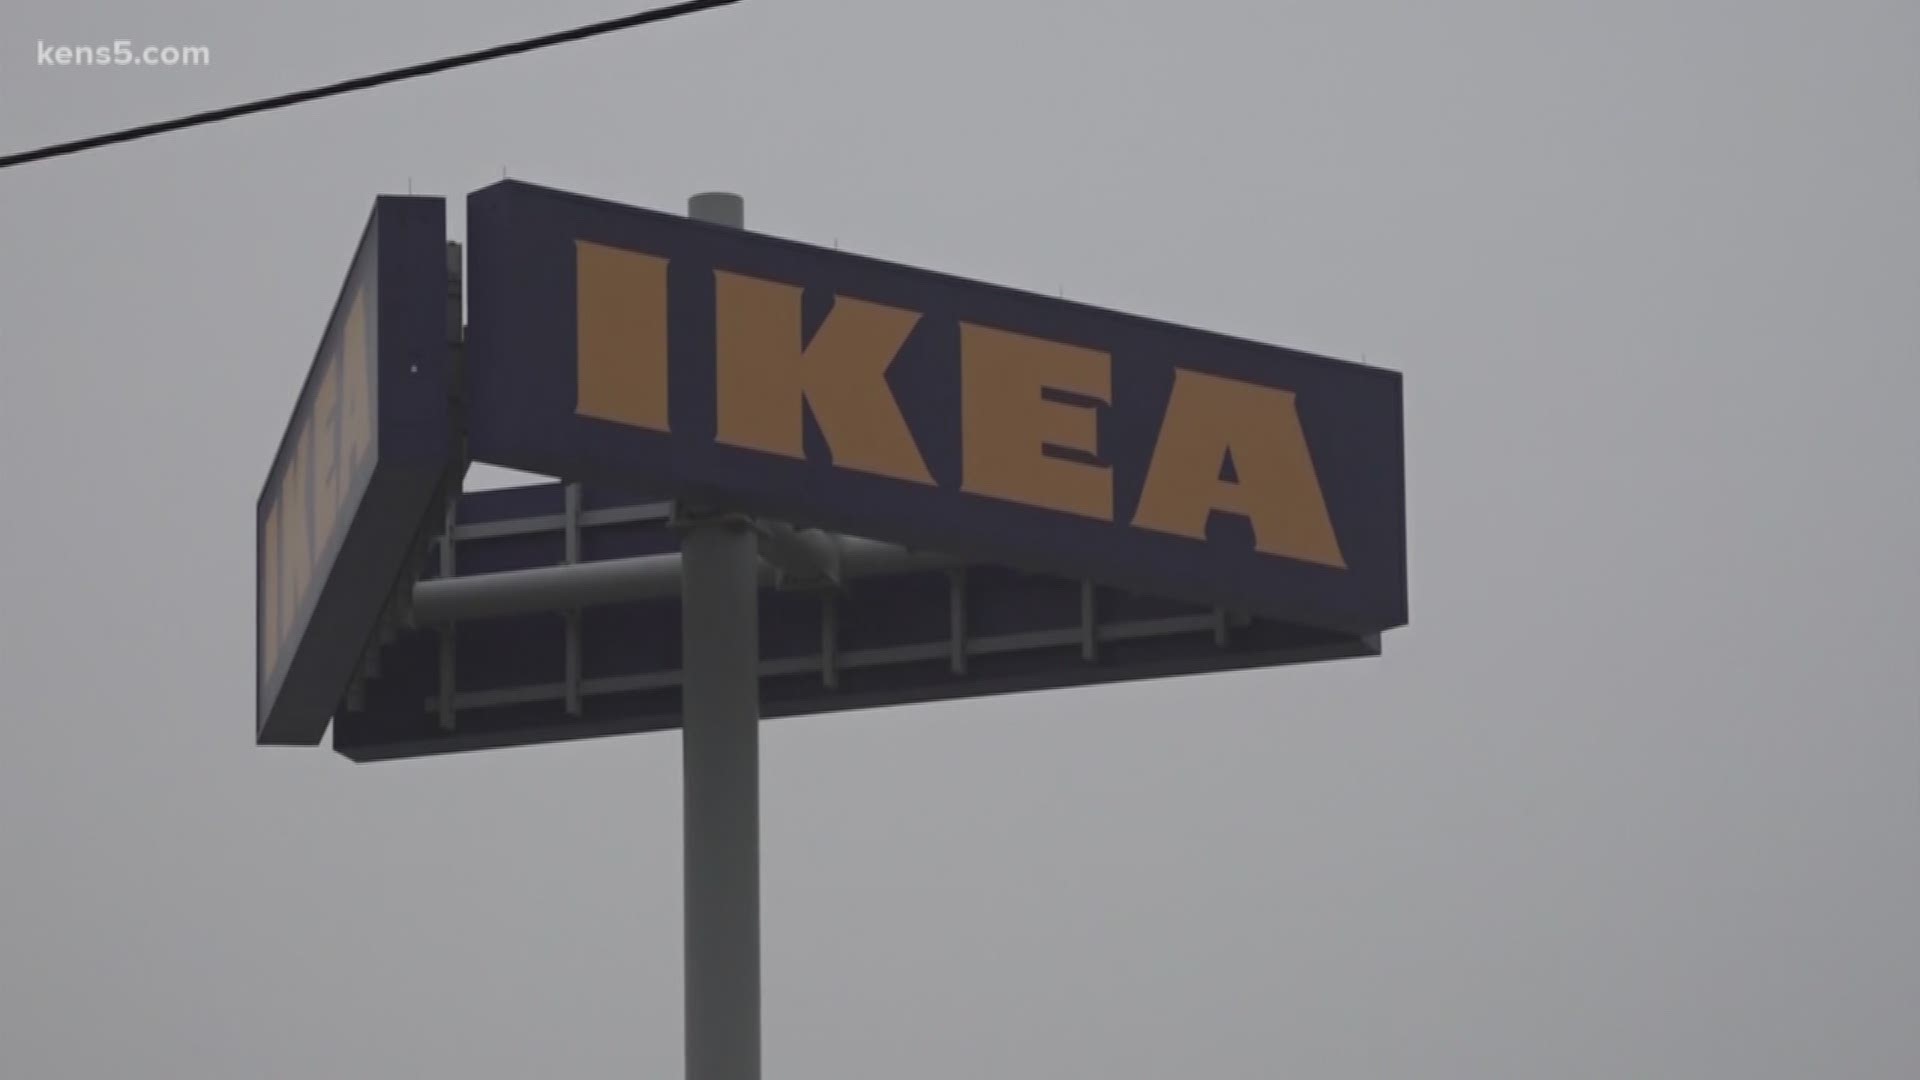 The countdown is on - the first IKEA store in South Texas opens less than a month from now.